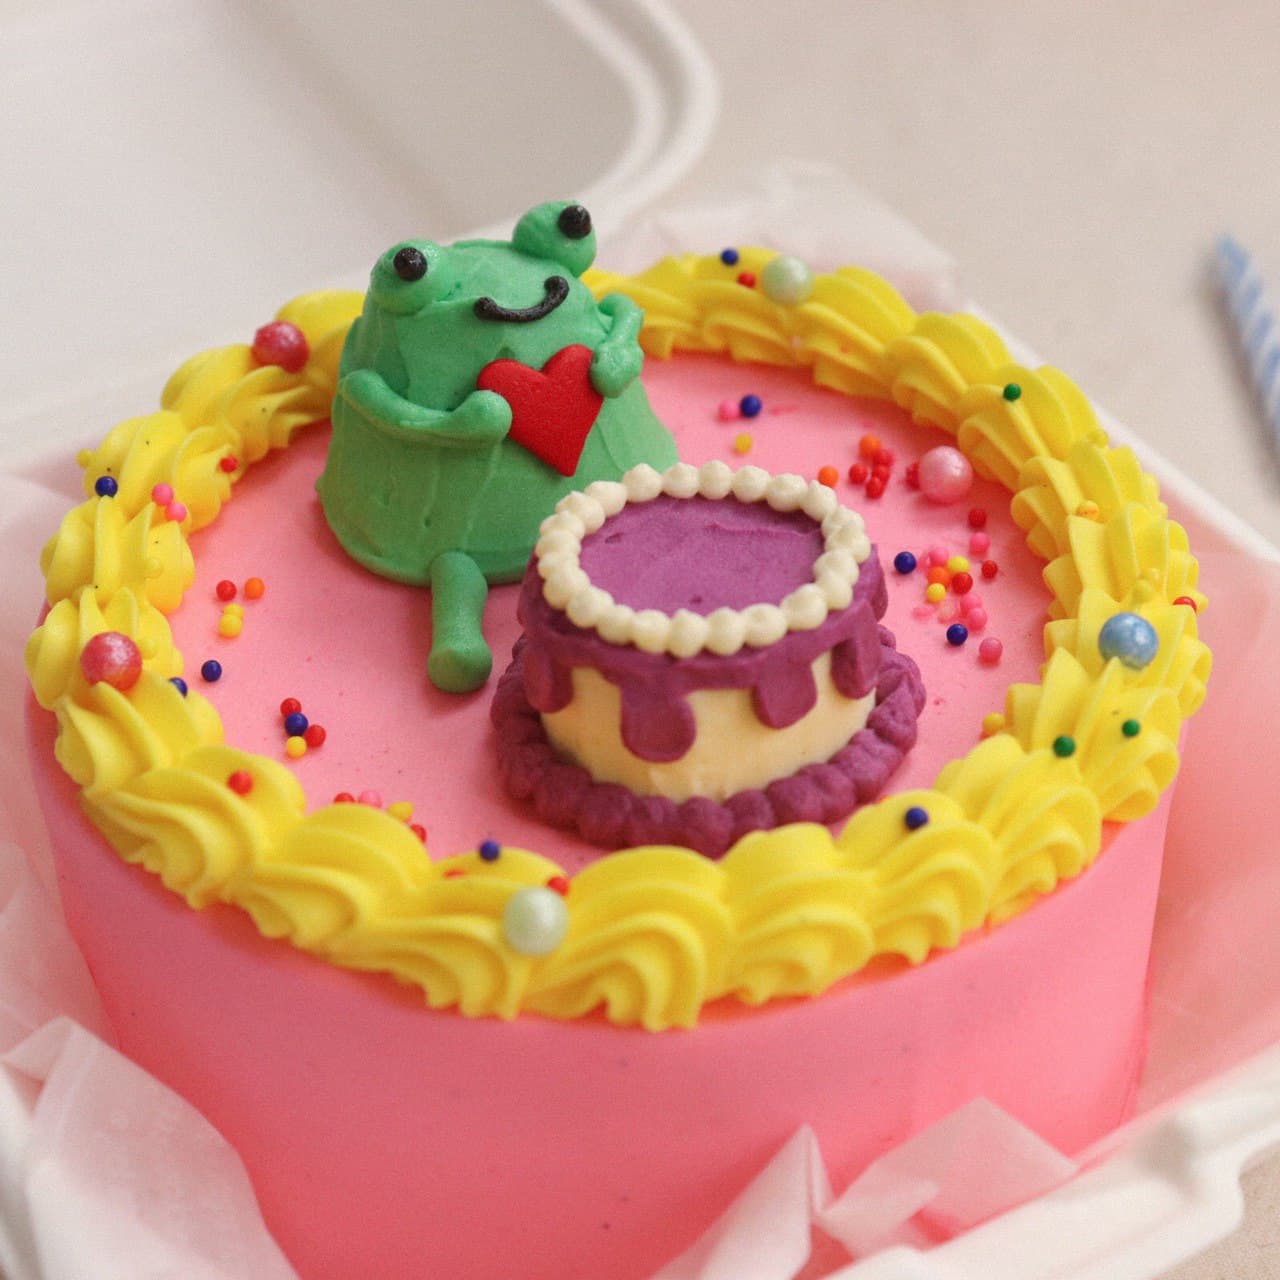 3D- Frog with Mini Cake